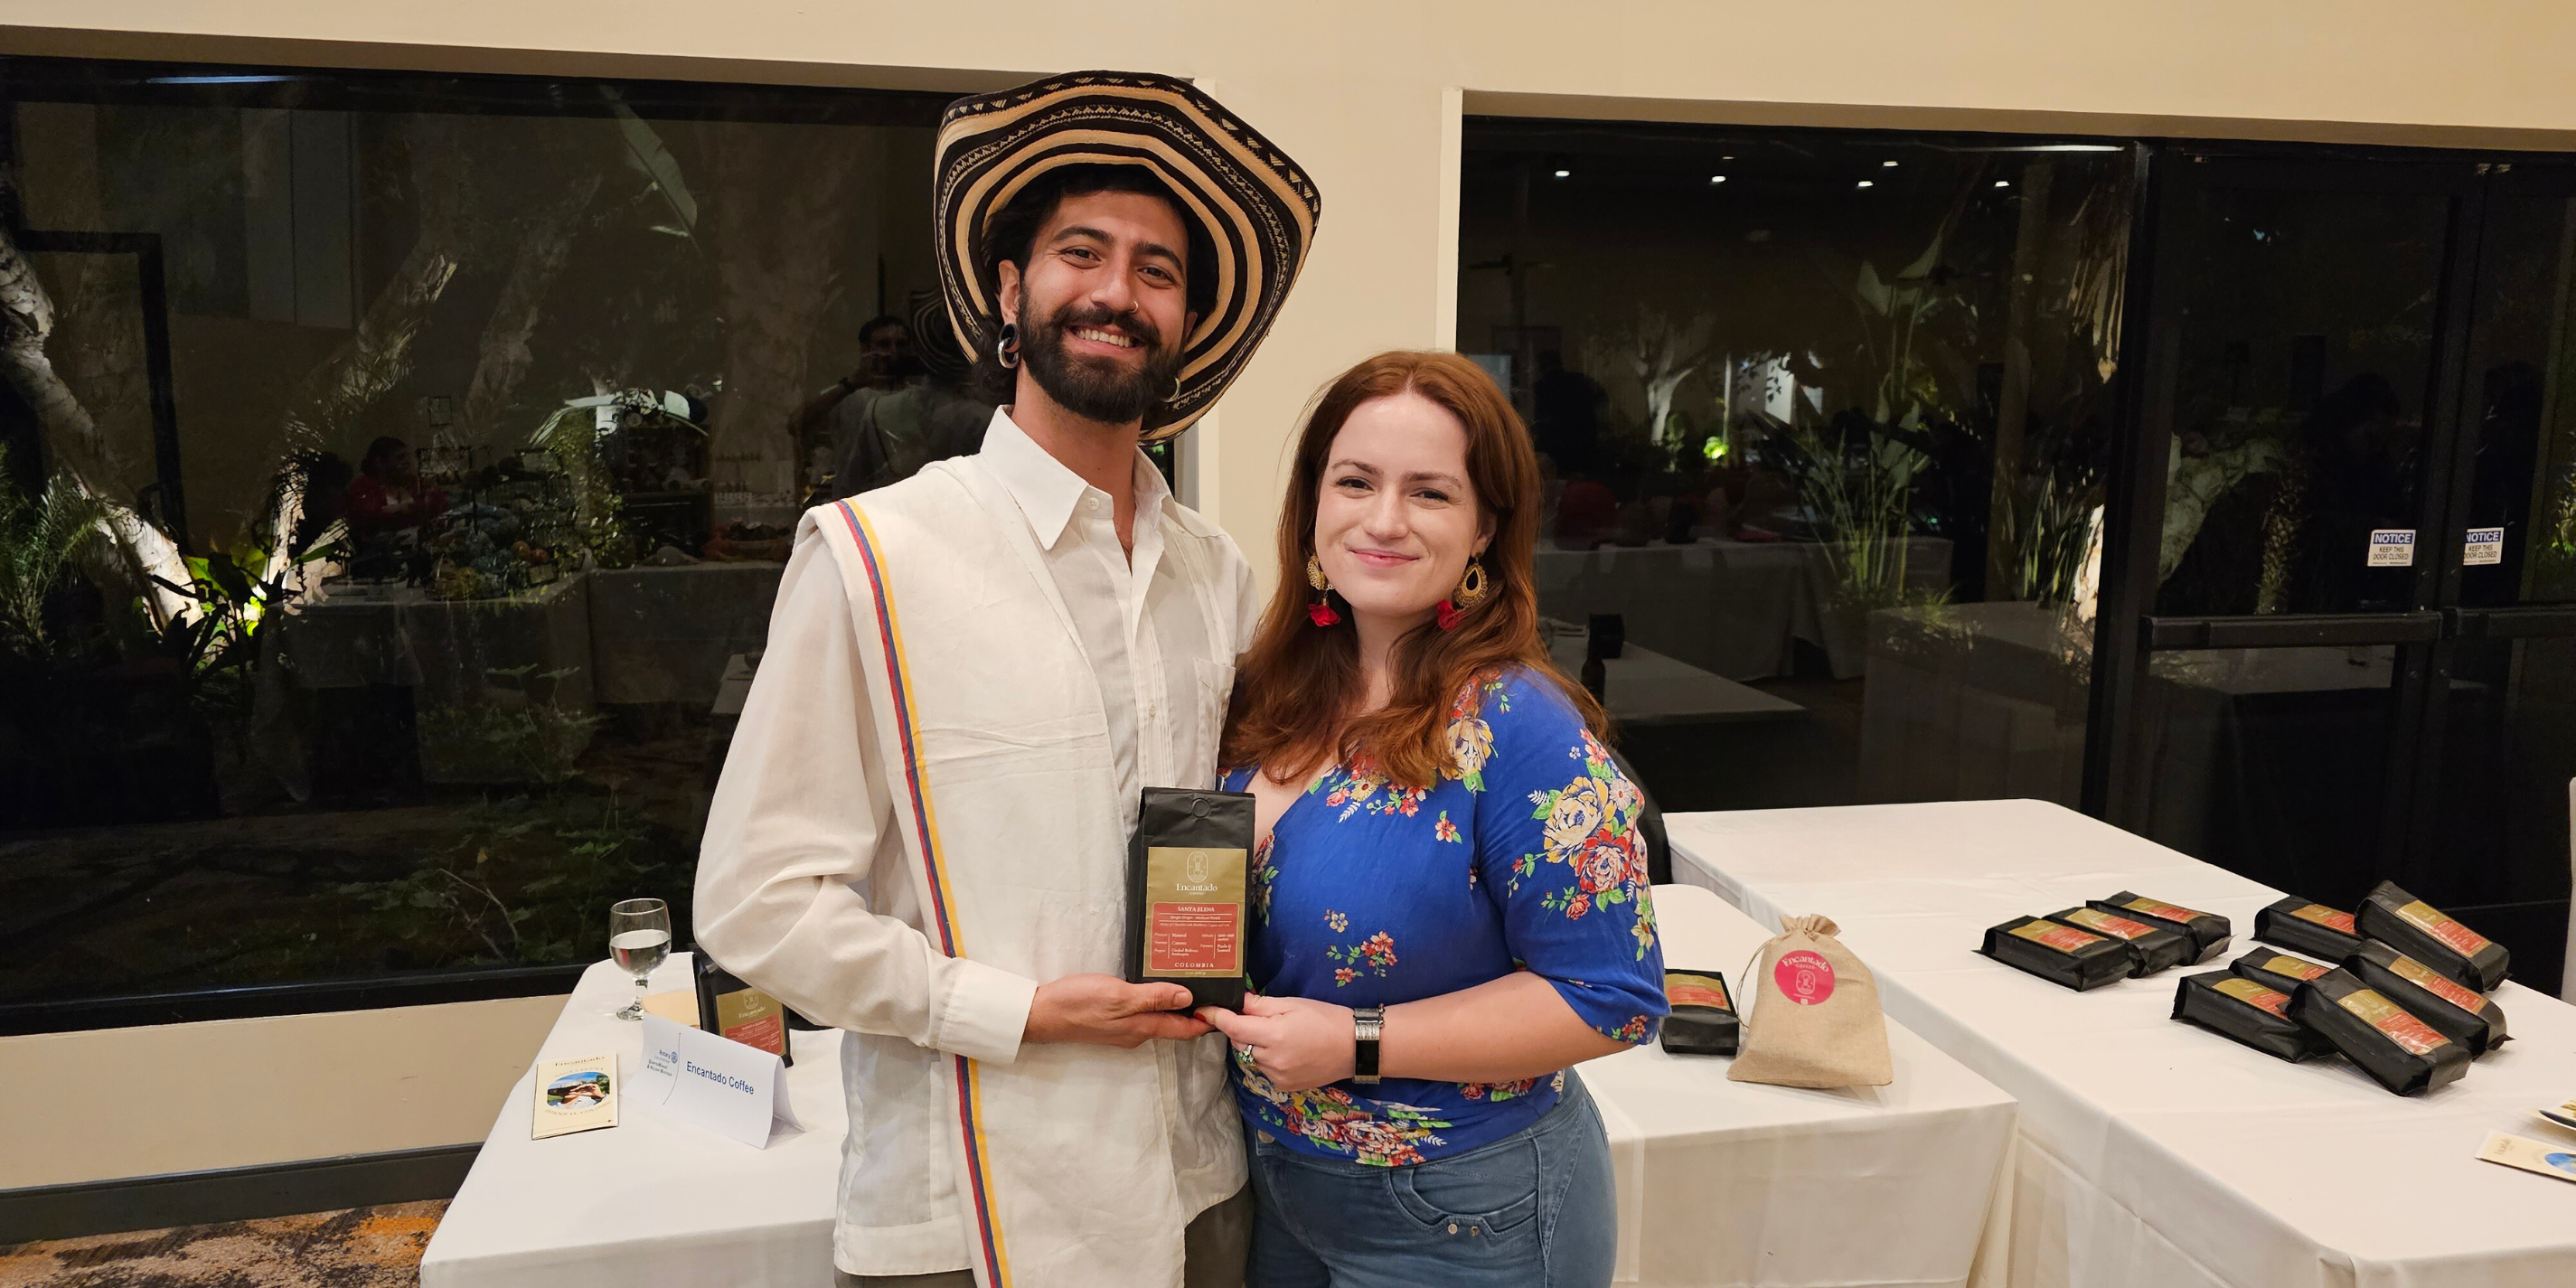 Encantado Coffee Co-Founders Sierra Roberts and Camilo Arbelaez hold a bag of Santa Elena Coffee in front of a display table at a market event.